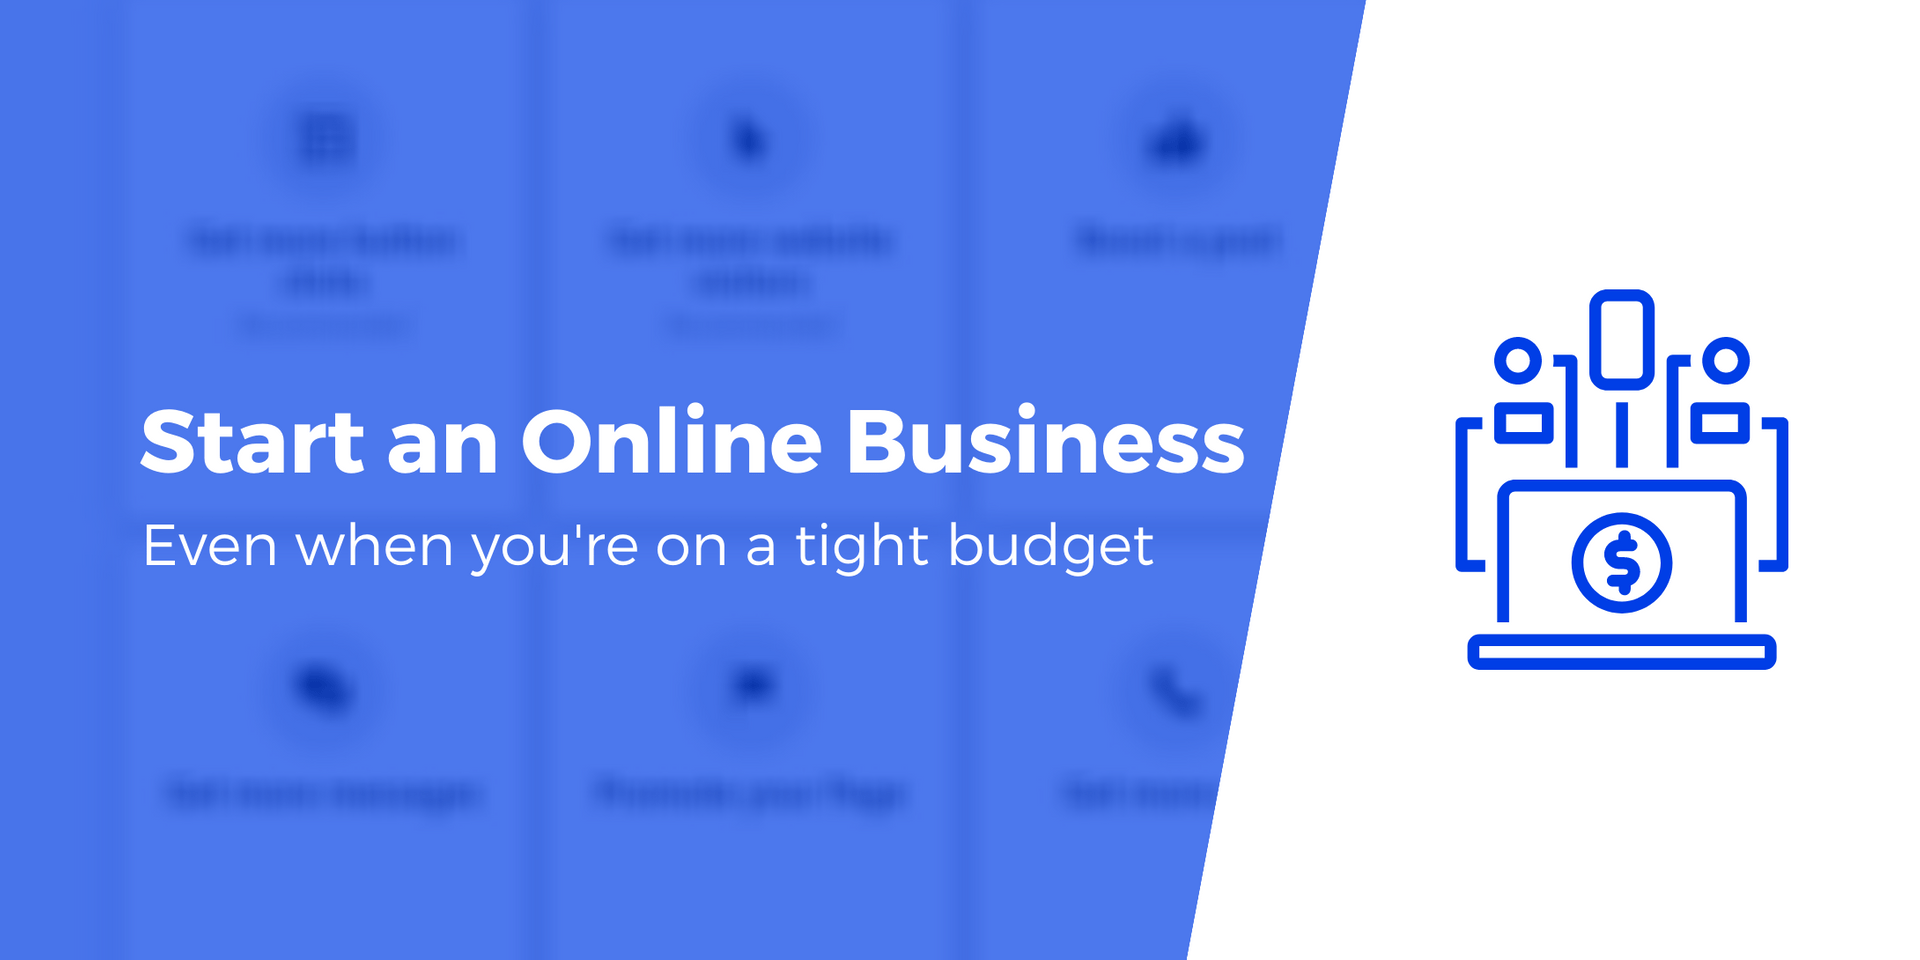 How to Start an Online Business for Less Than $145 In 2021